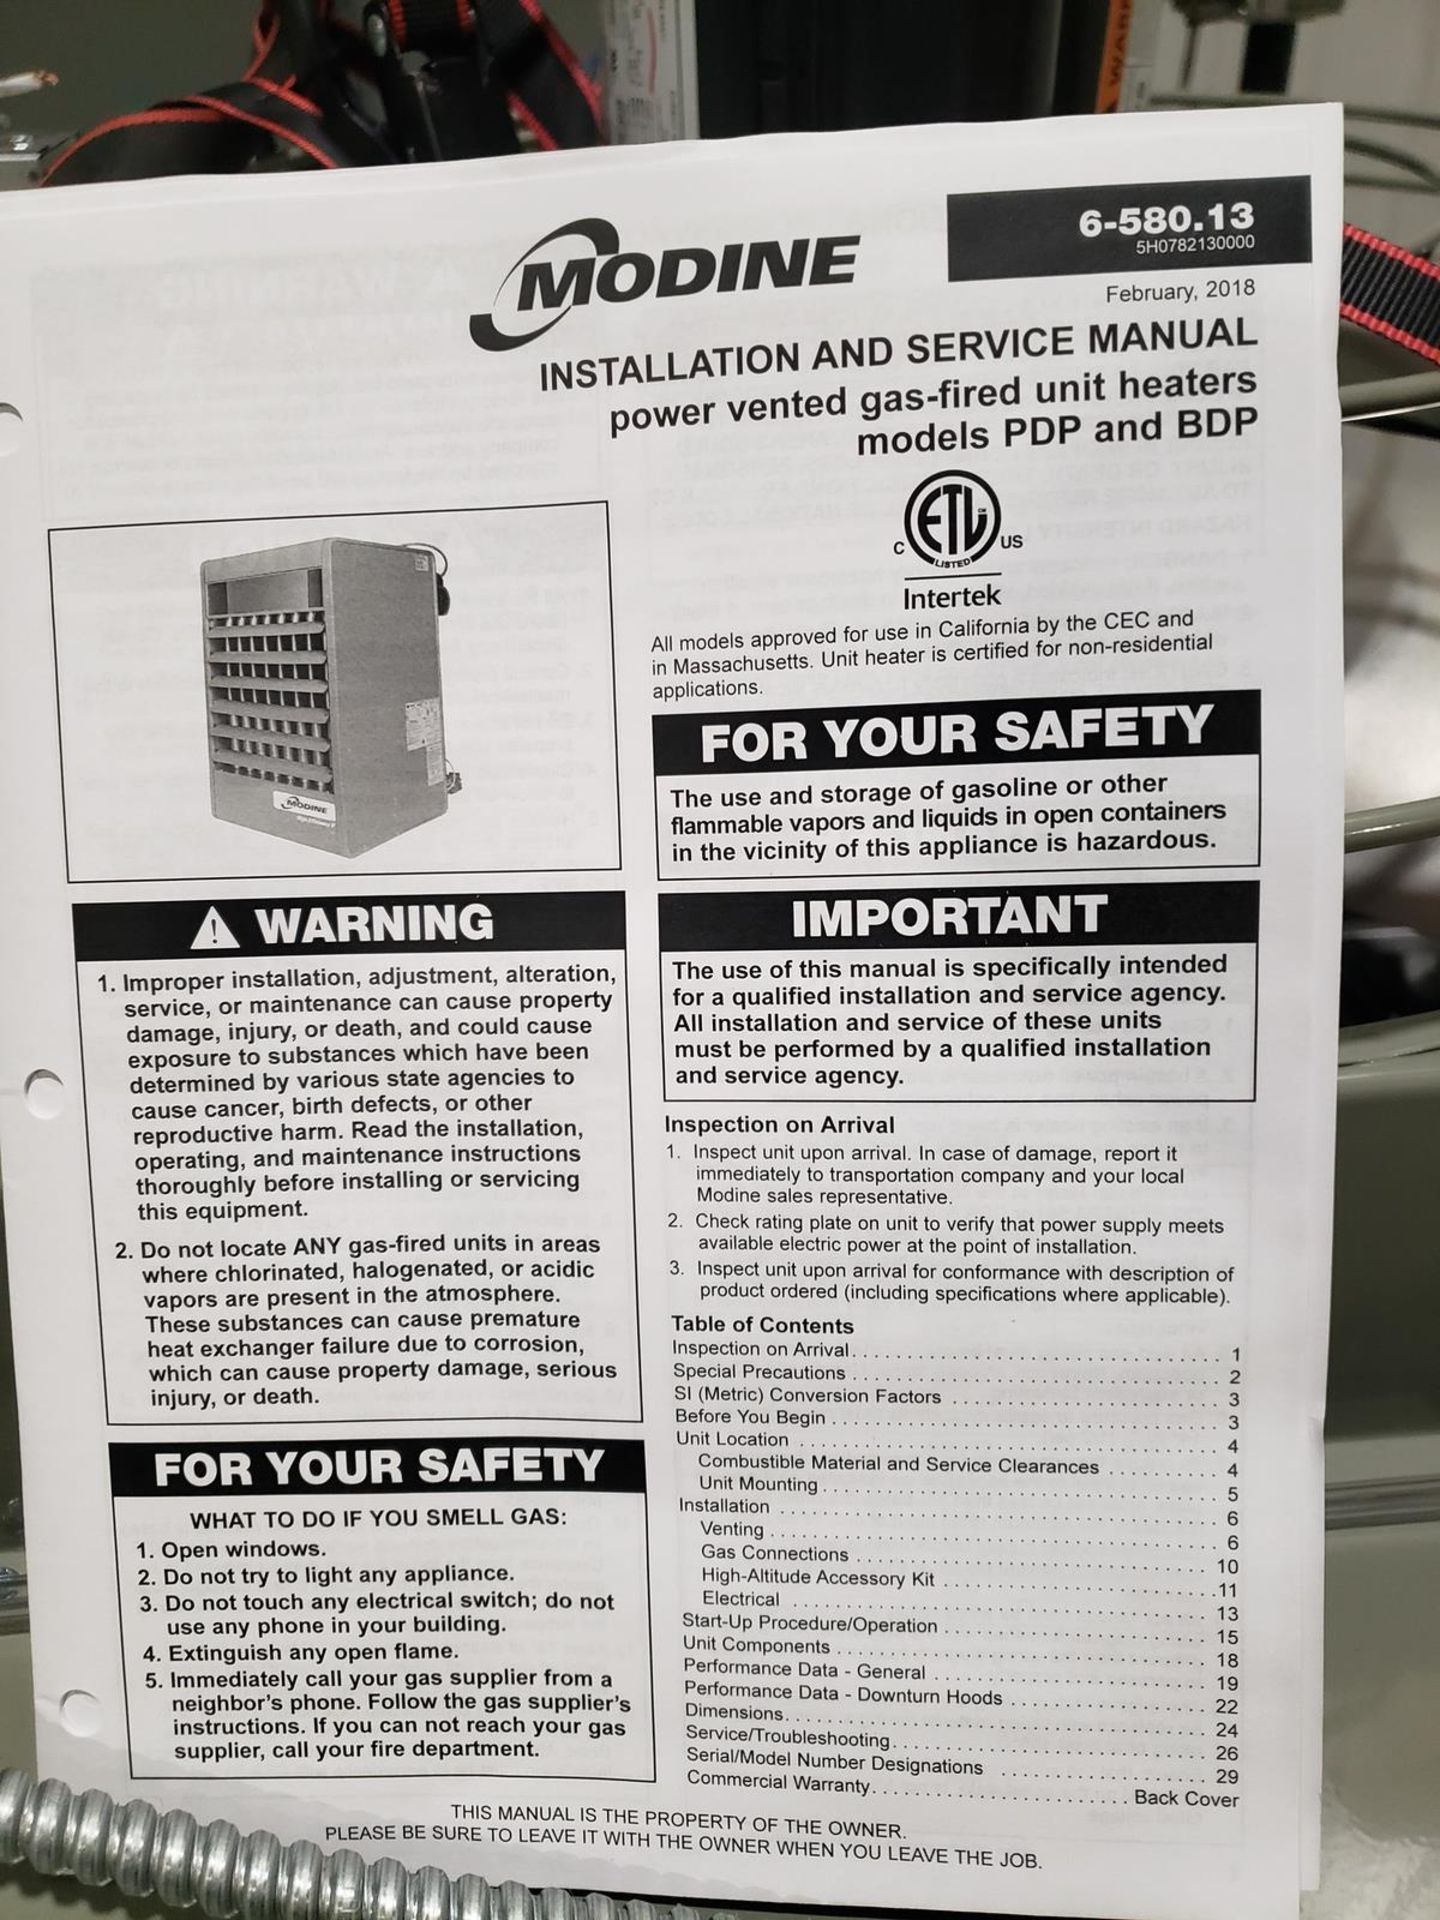 Modine Power Vented Gas-Fired Heater Unit, M# PDP400AE-0130-SBAN | Rig Fee $35 - Image 2 of 3